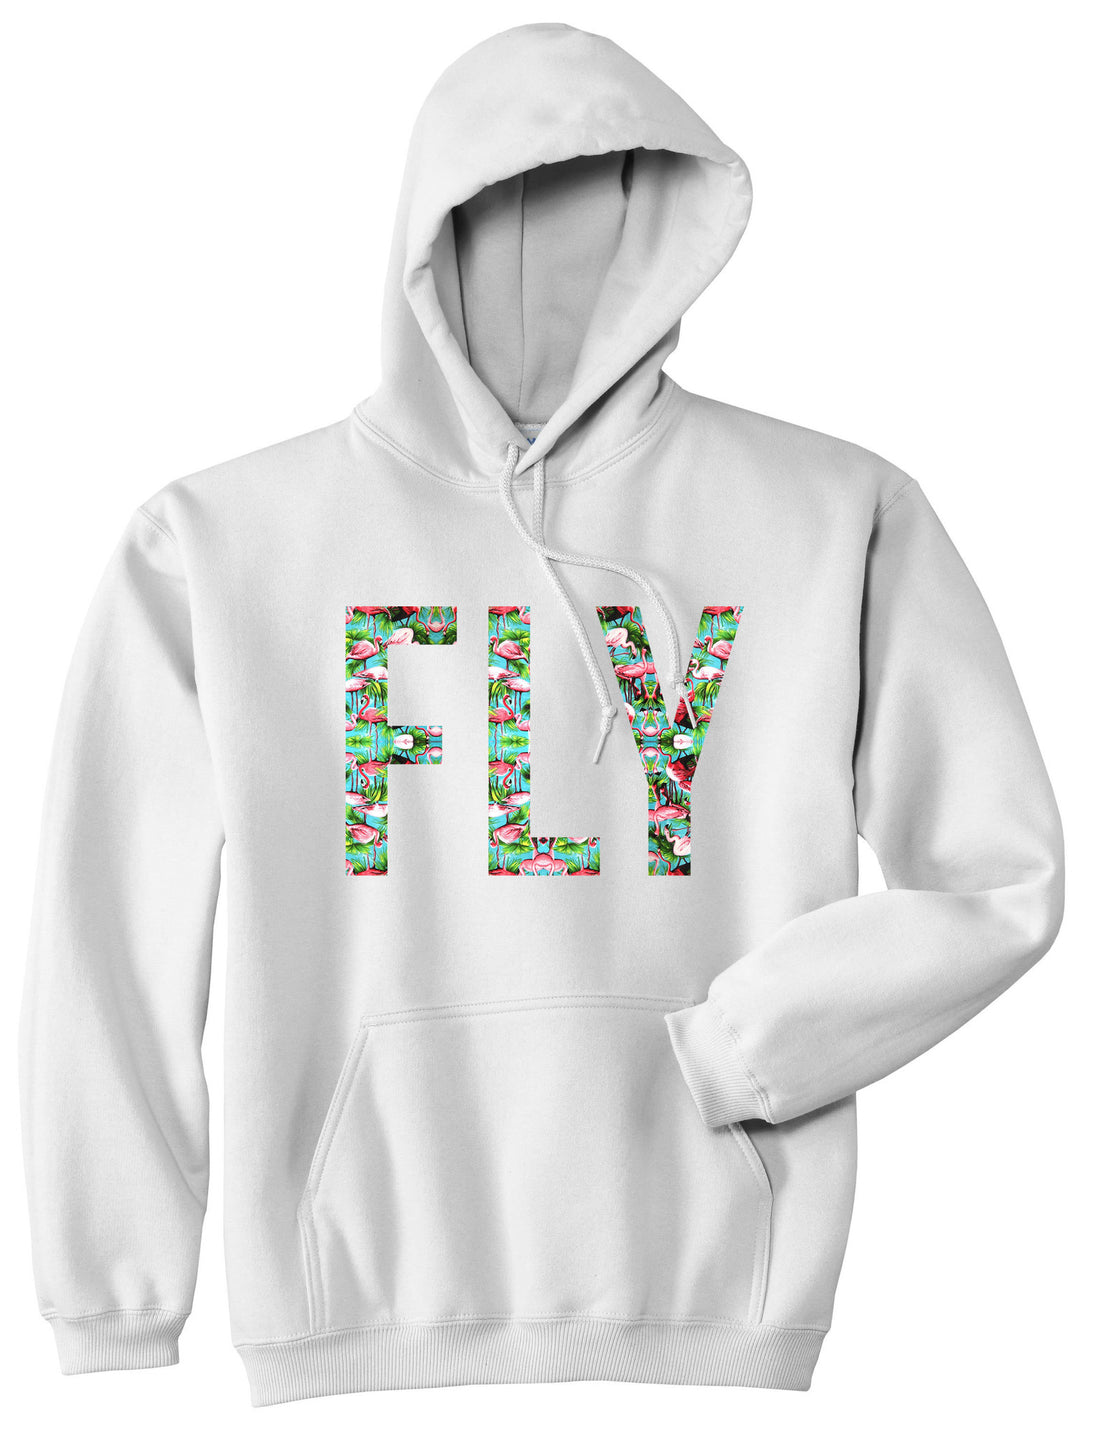 FLY Flamingo Print Summer Wild Society Pullover Hoodie Hoody in White by Kings Of NY